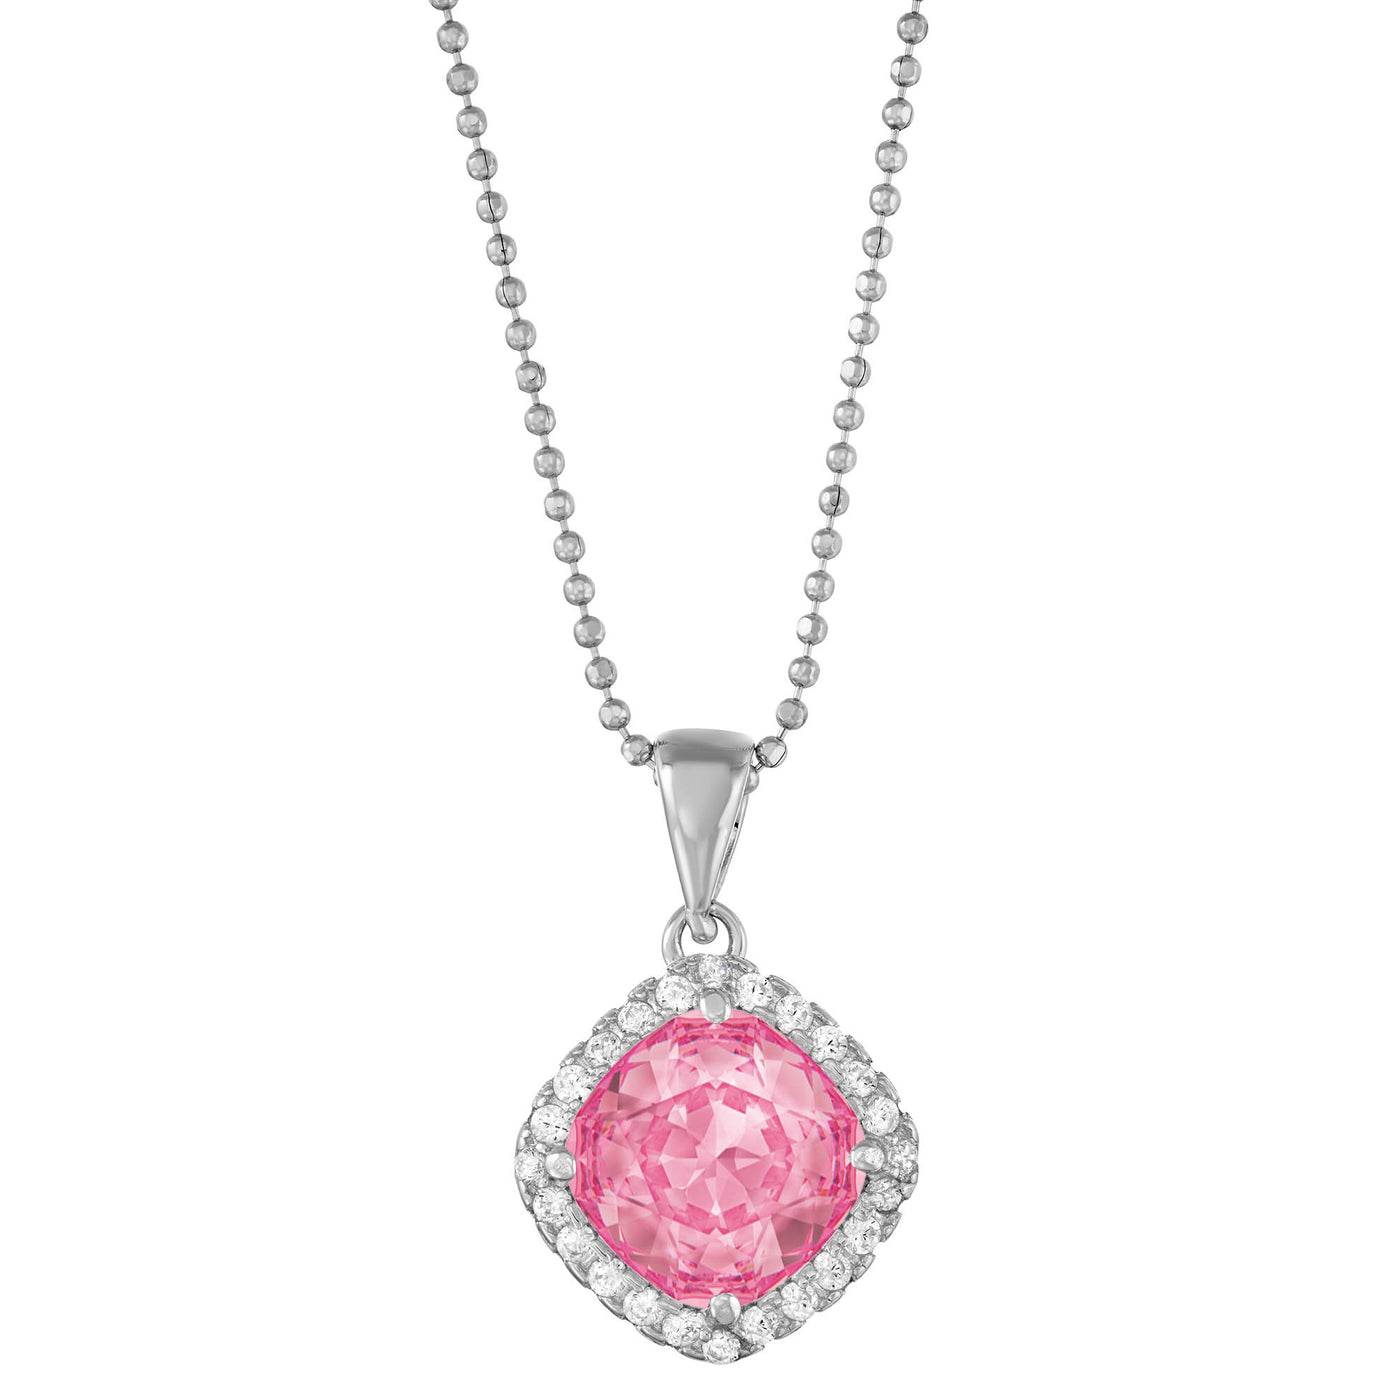 Rebecca Sloane Silver Cushion with Faceted Pink CZ Pendant